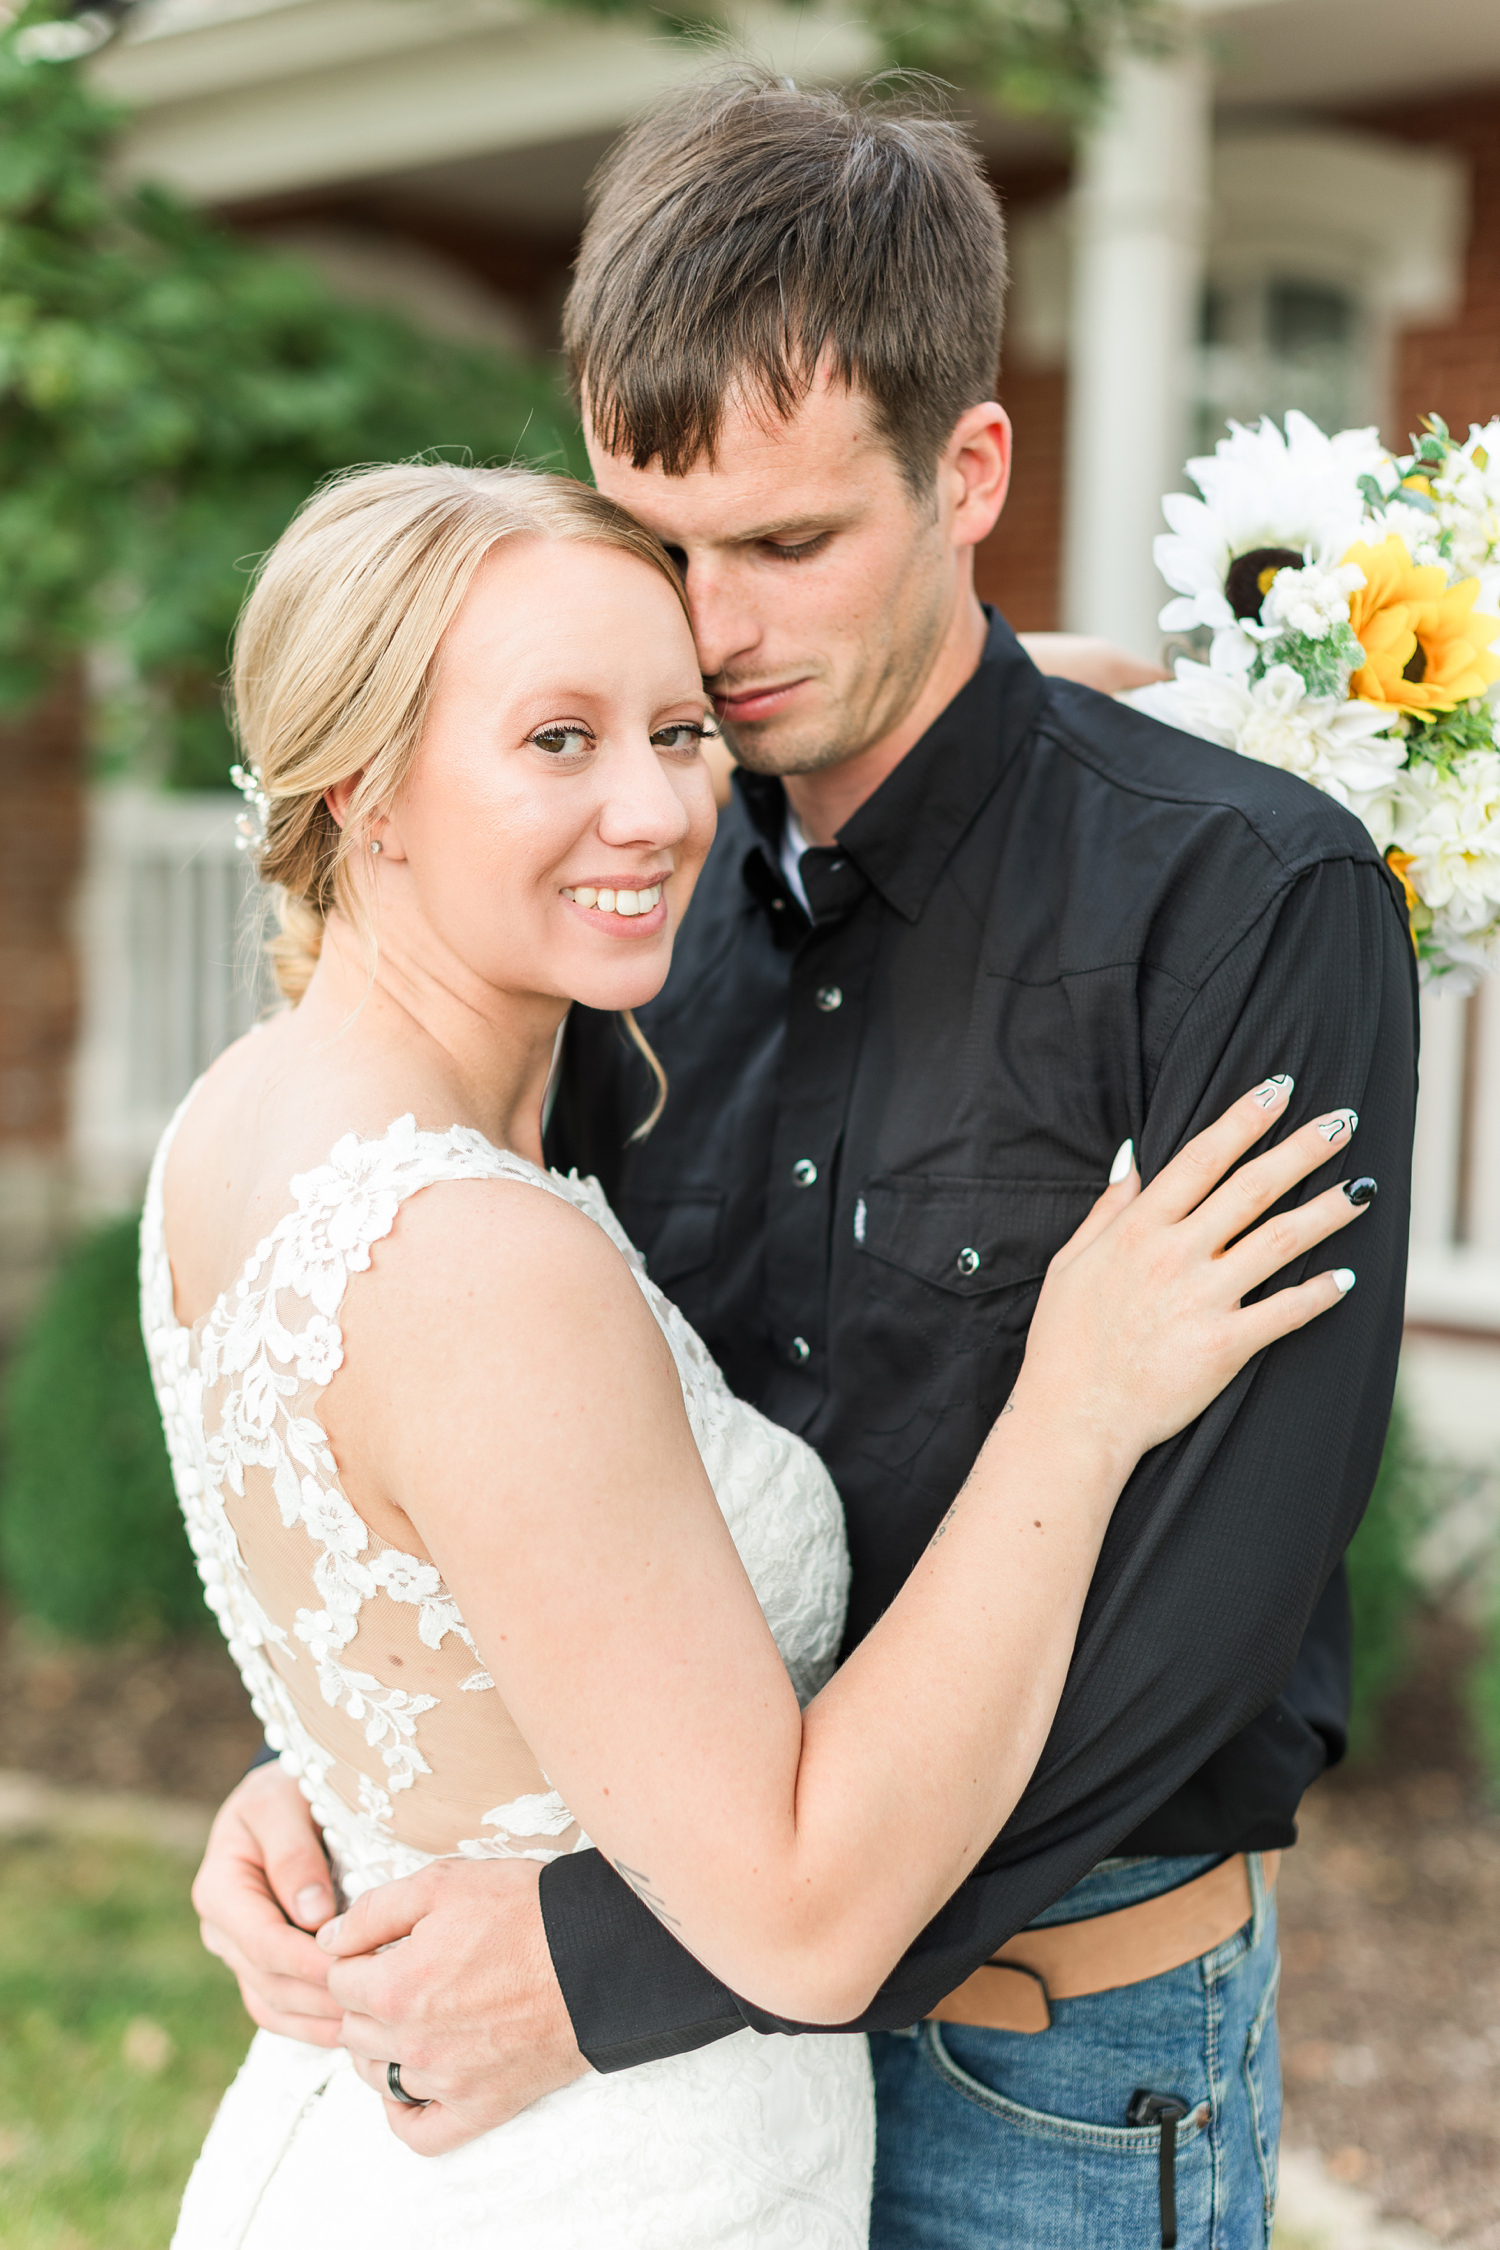 Zane nuzzles Mckennan close in front of the Mill Farm House at the Humboldt County Historical Museum | CB Studio